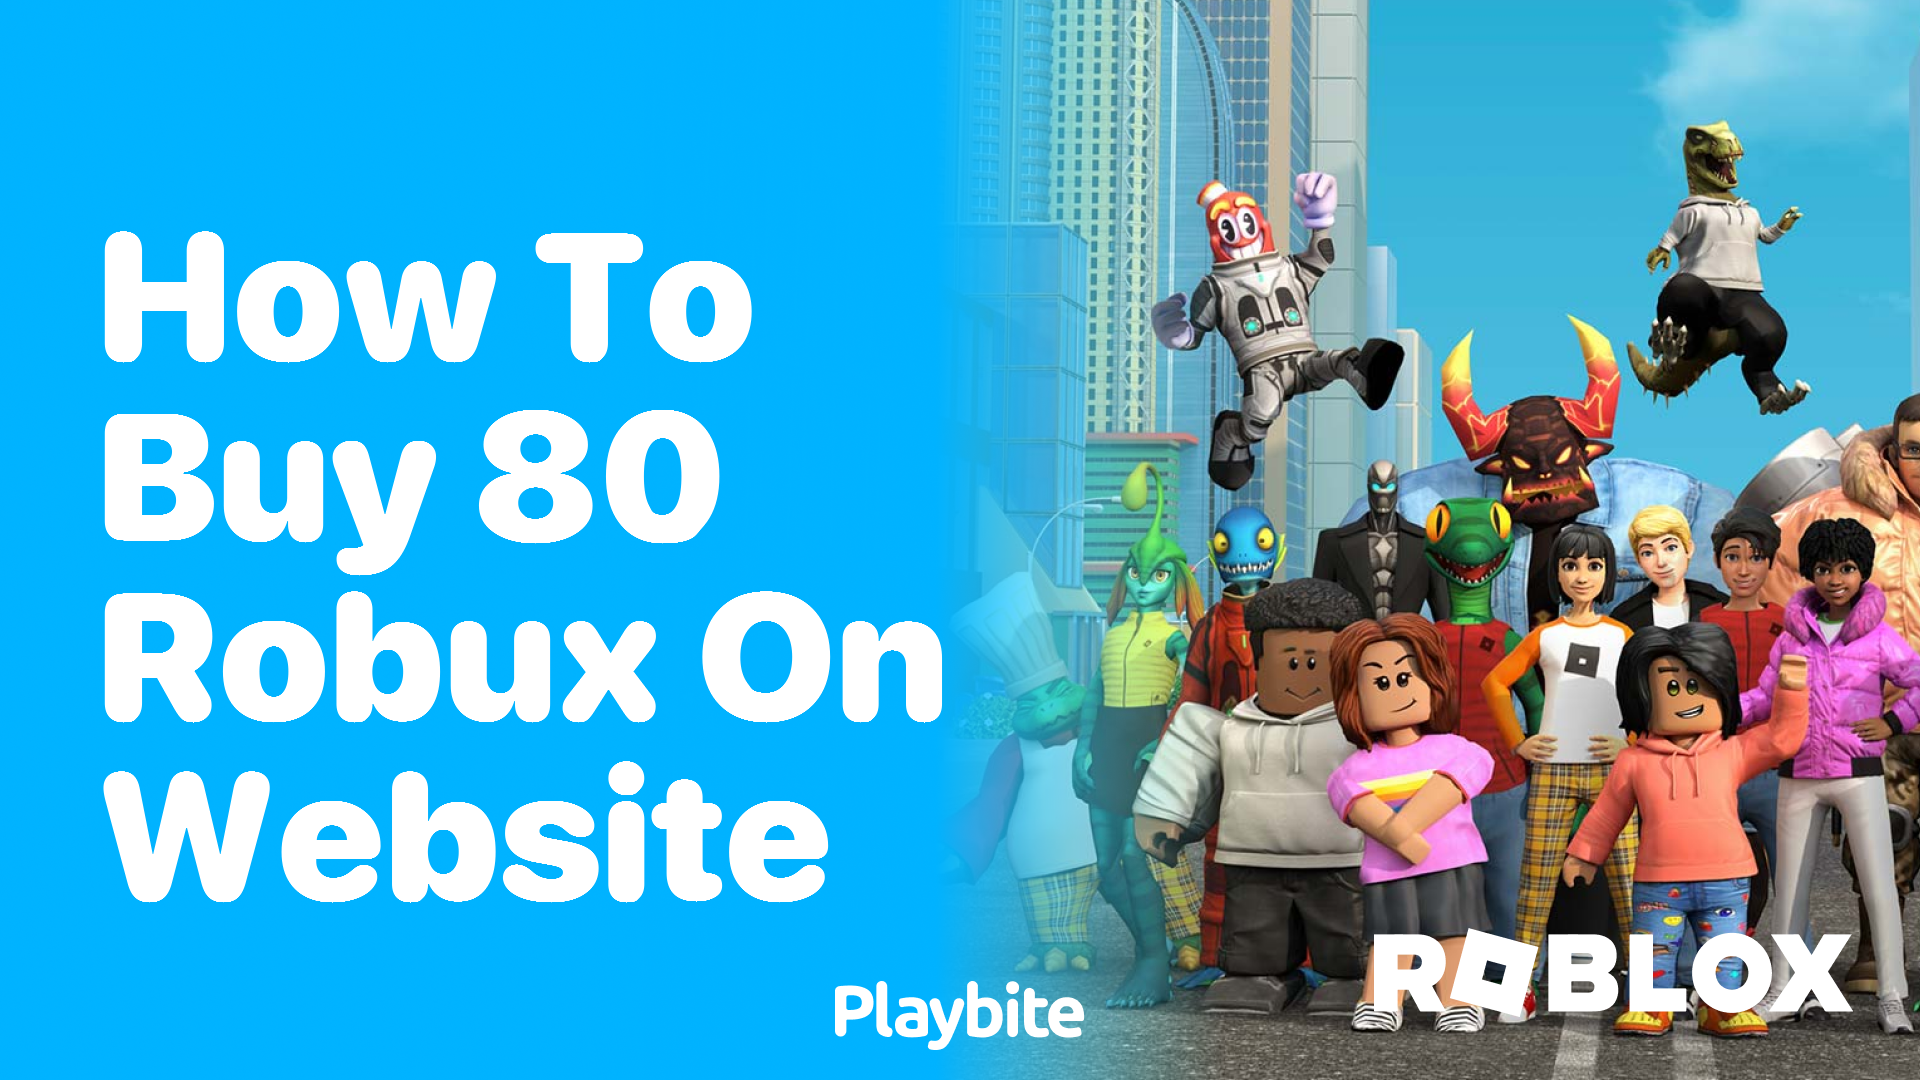 Buy to get 80 robux - Roblox